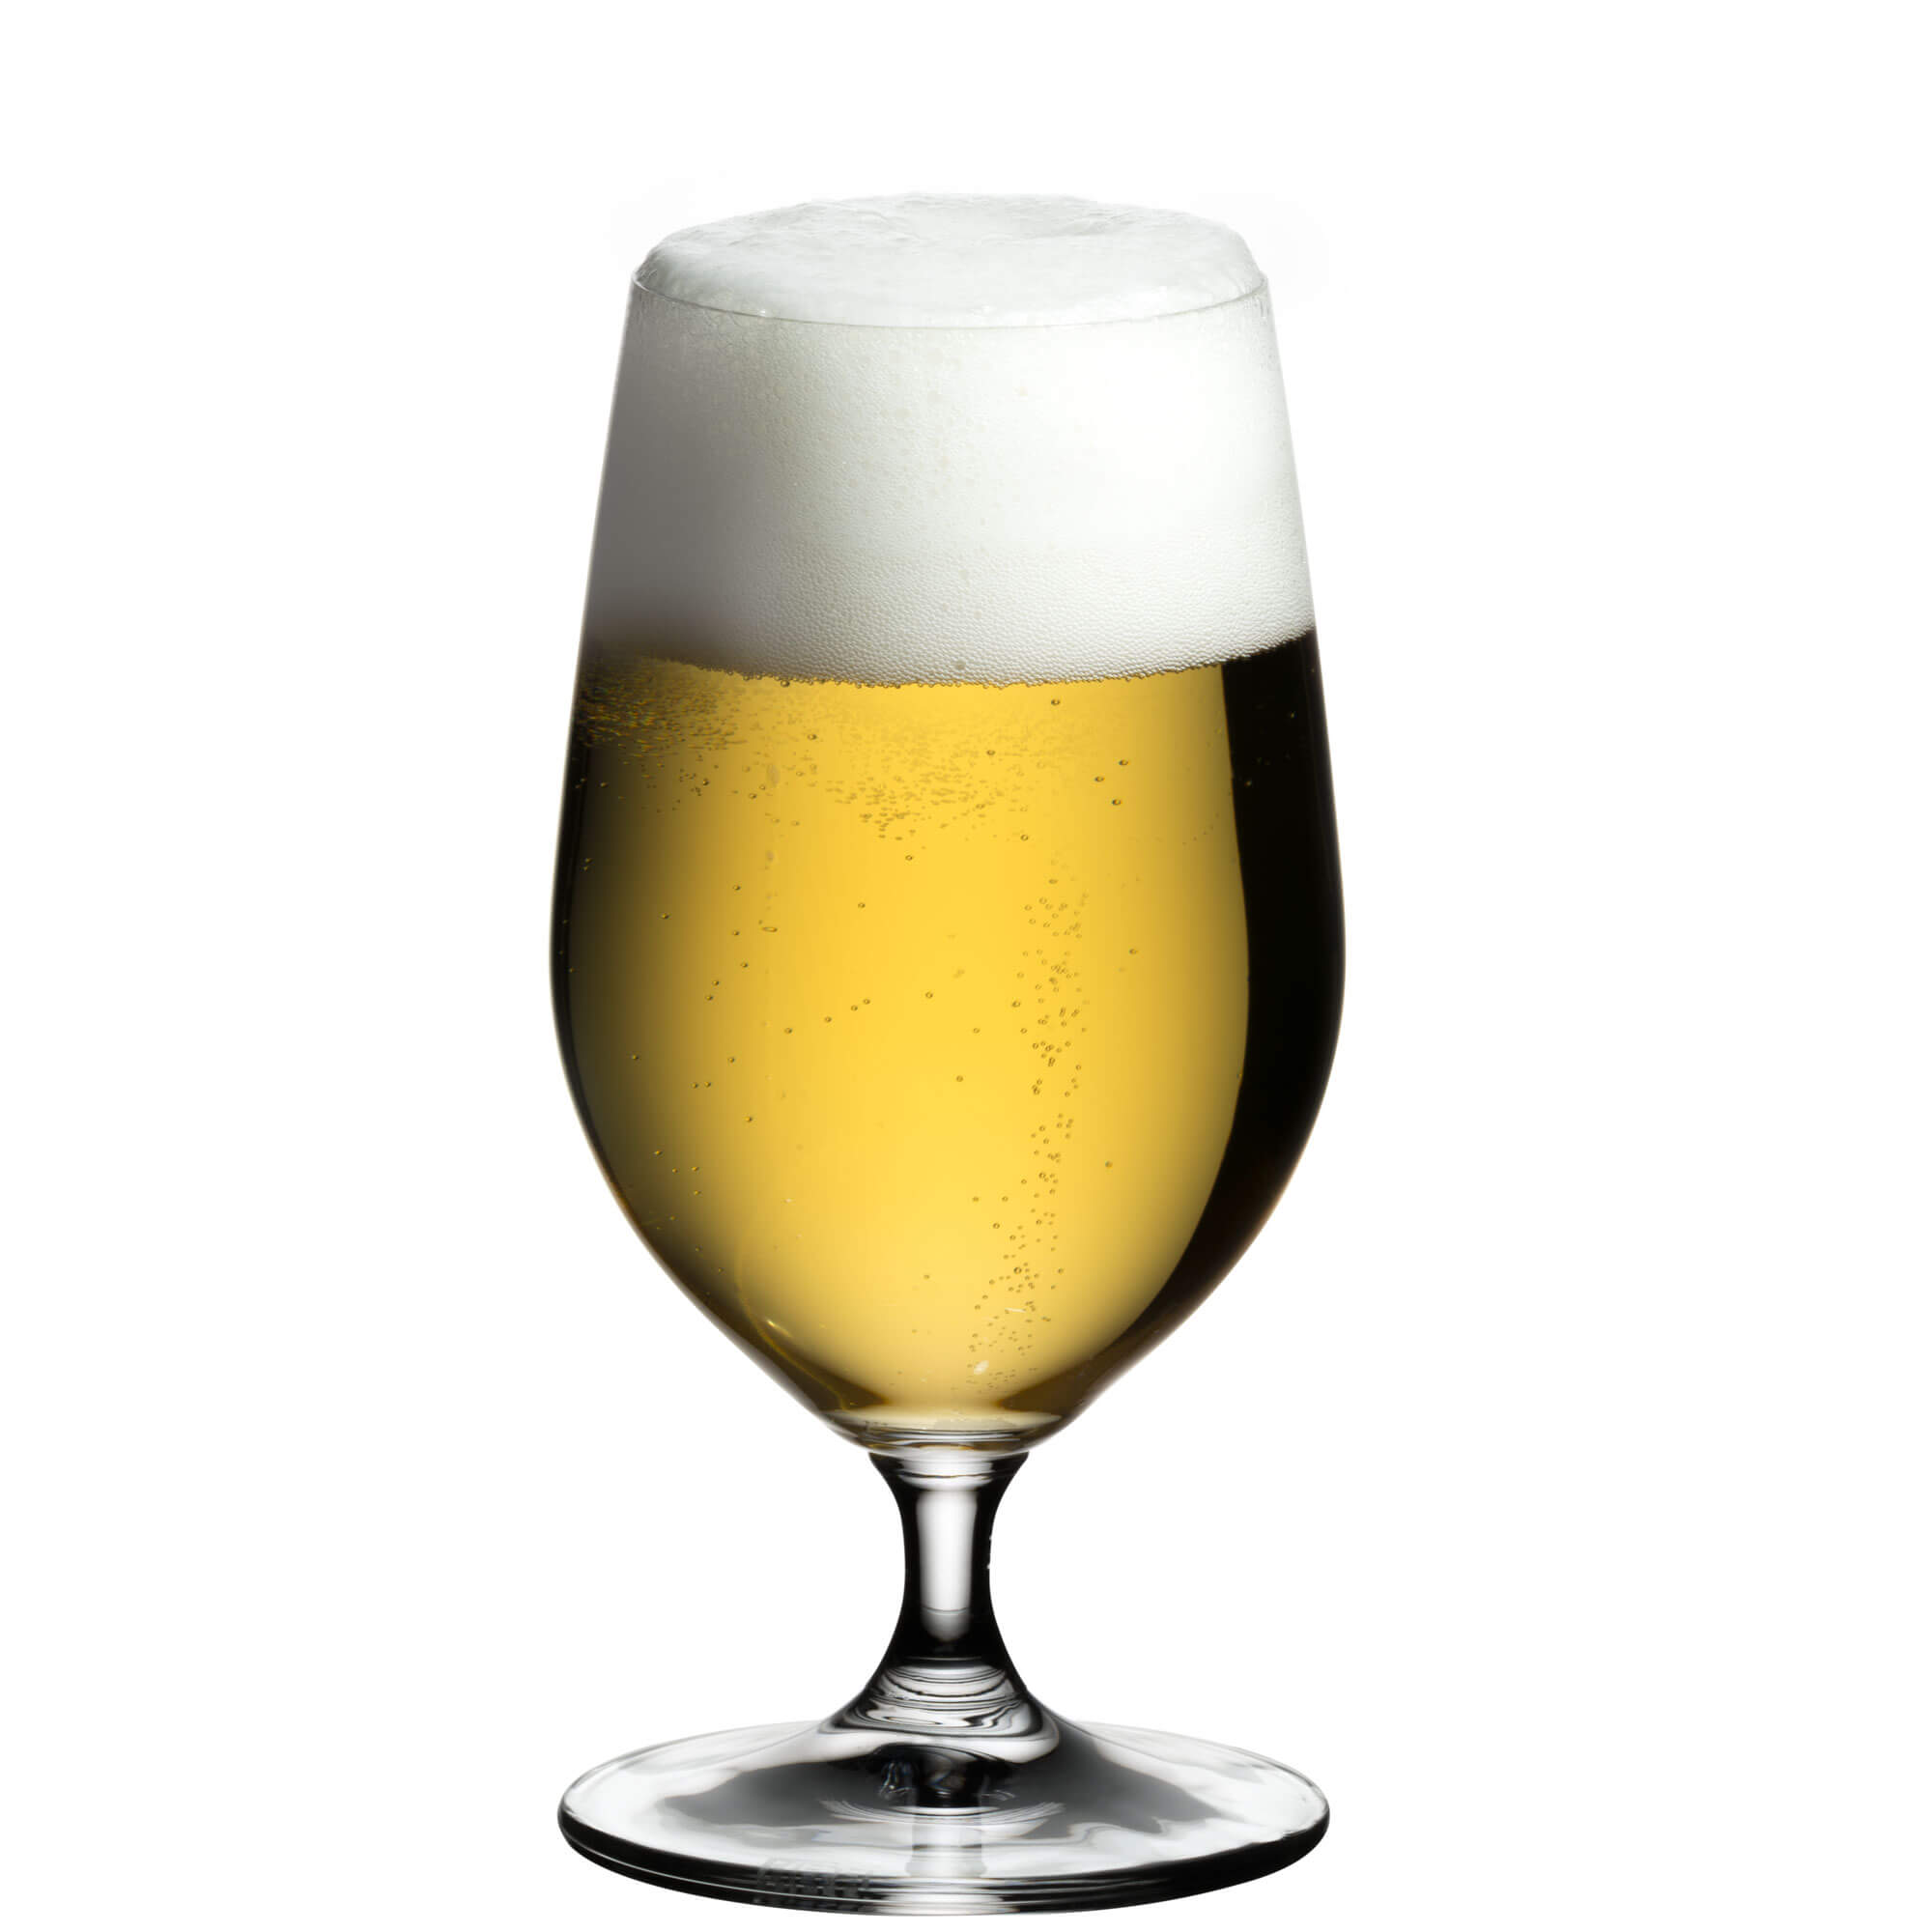 Beer glass Ouverture, Riedel - 500ml (2 pcs.)